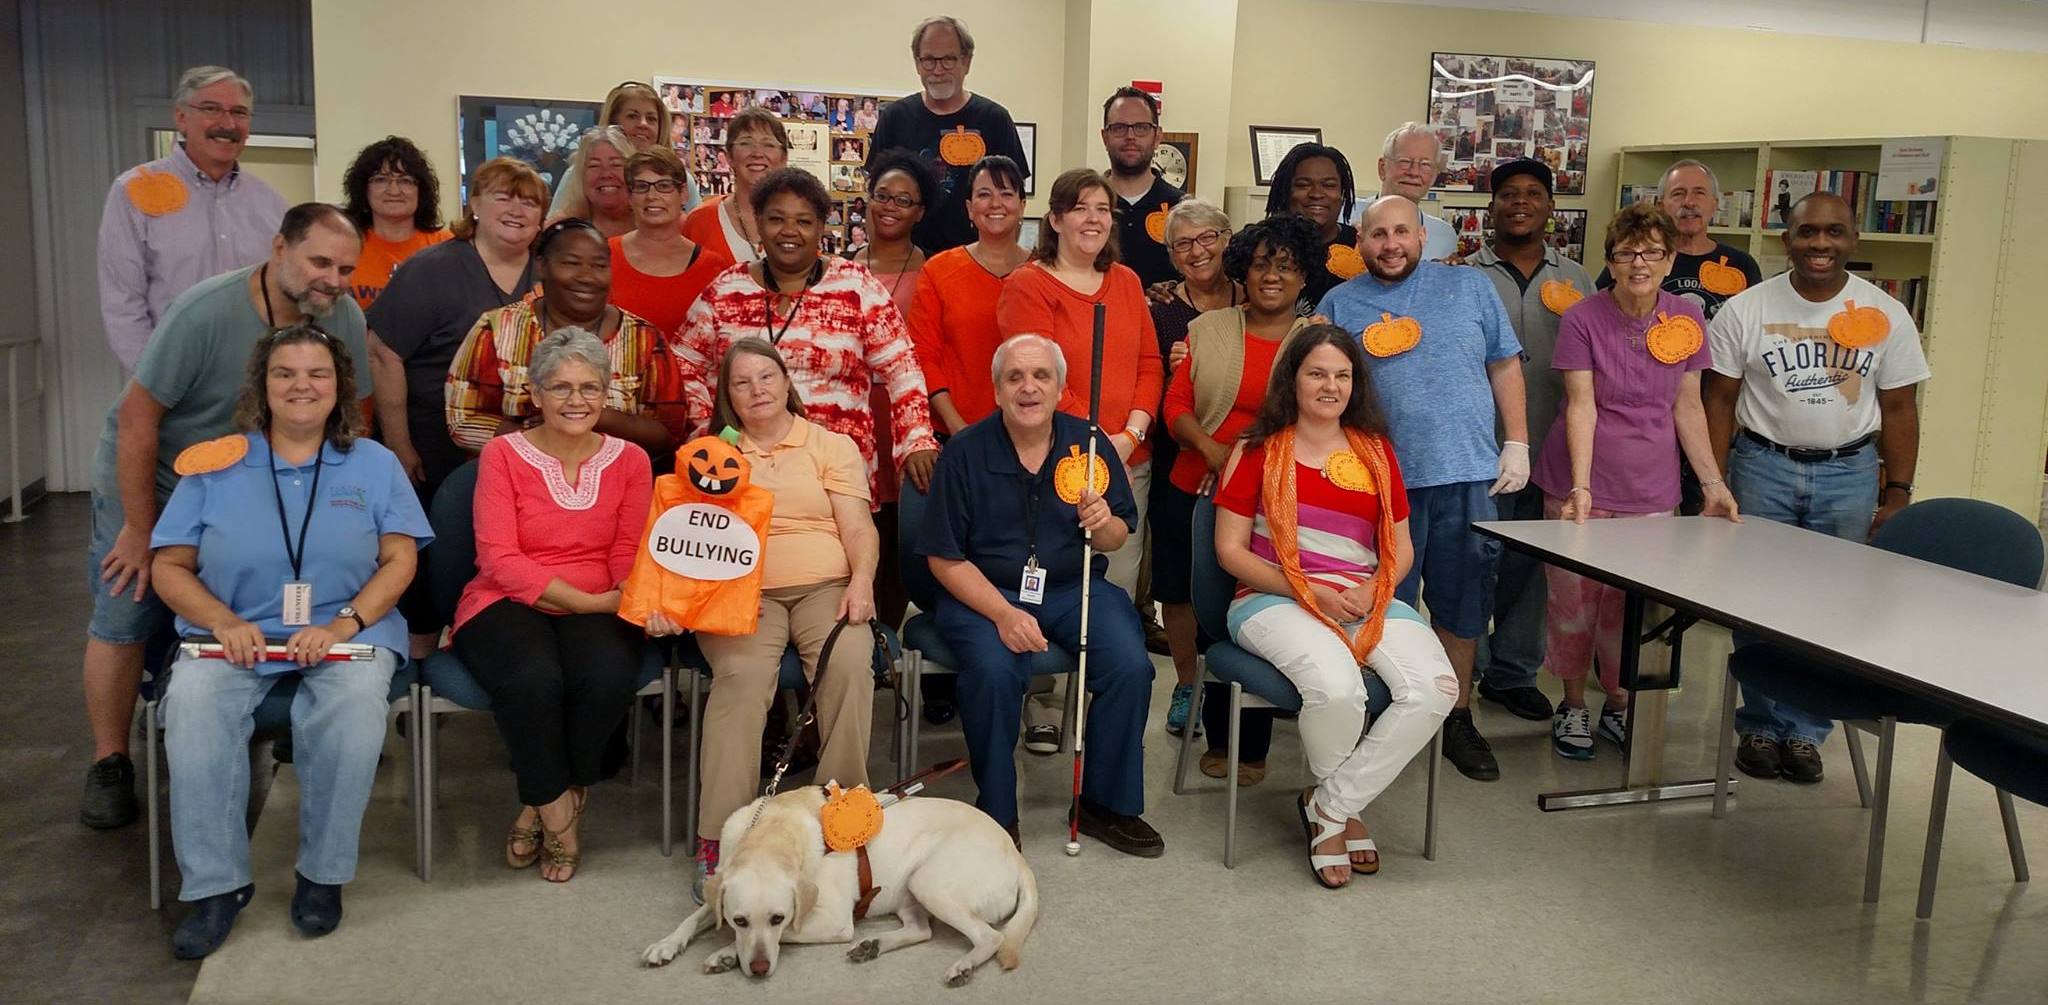 DBS employees wearing orange in support of bully awareness